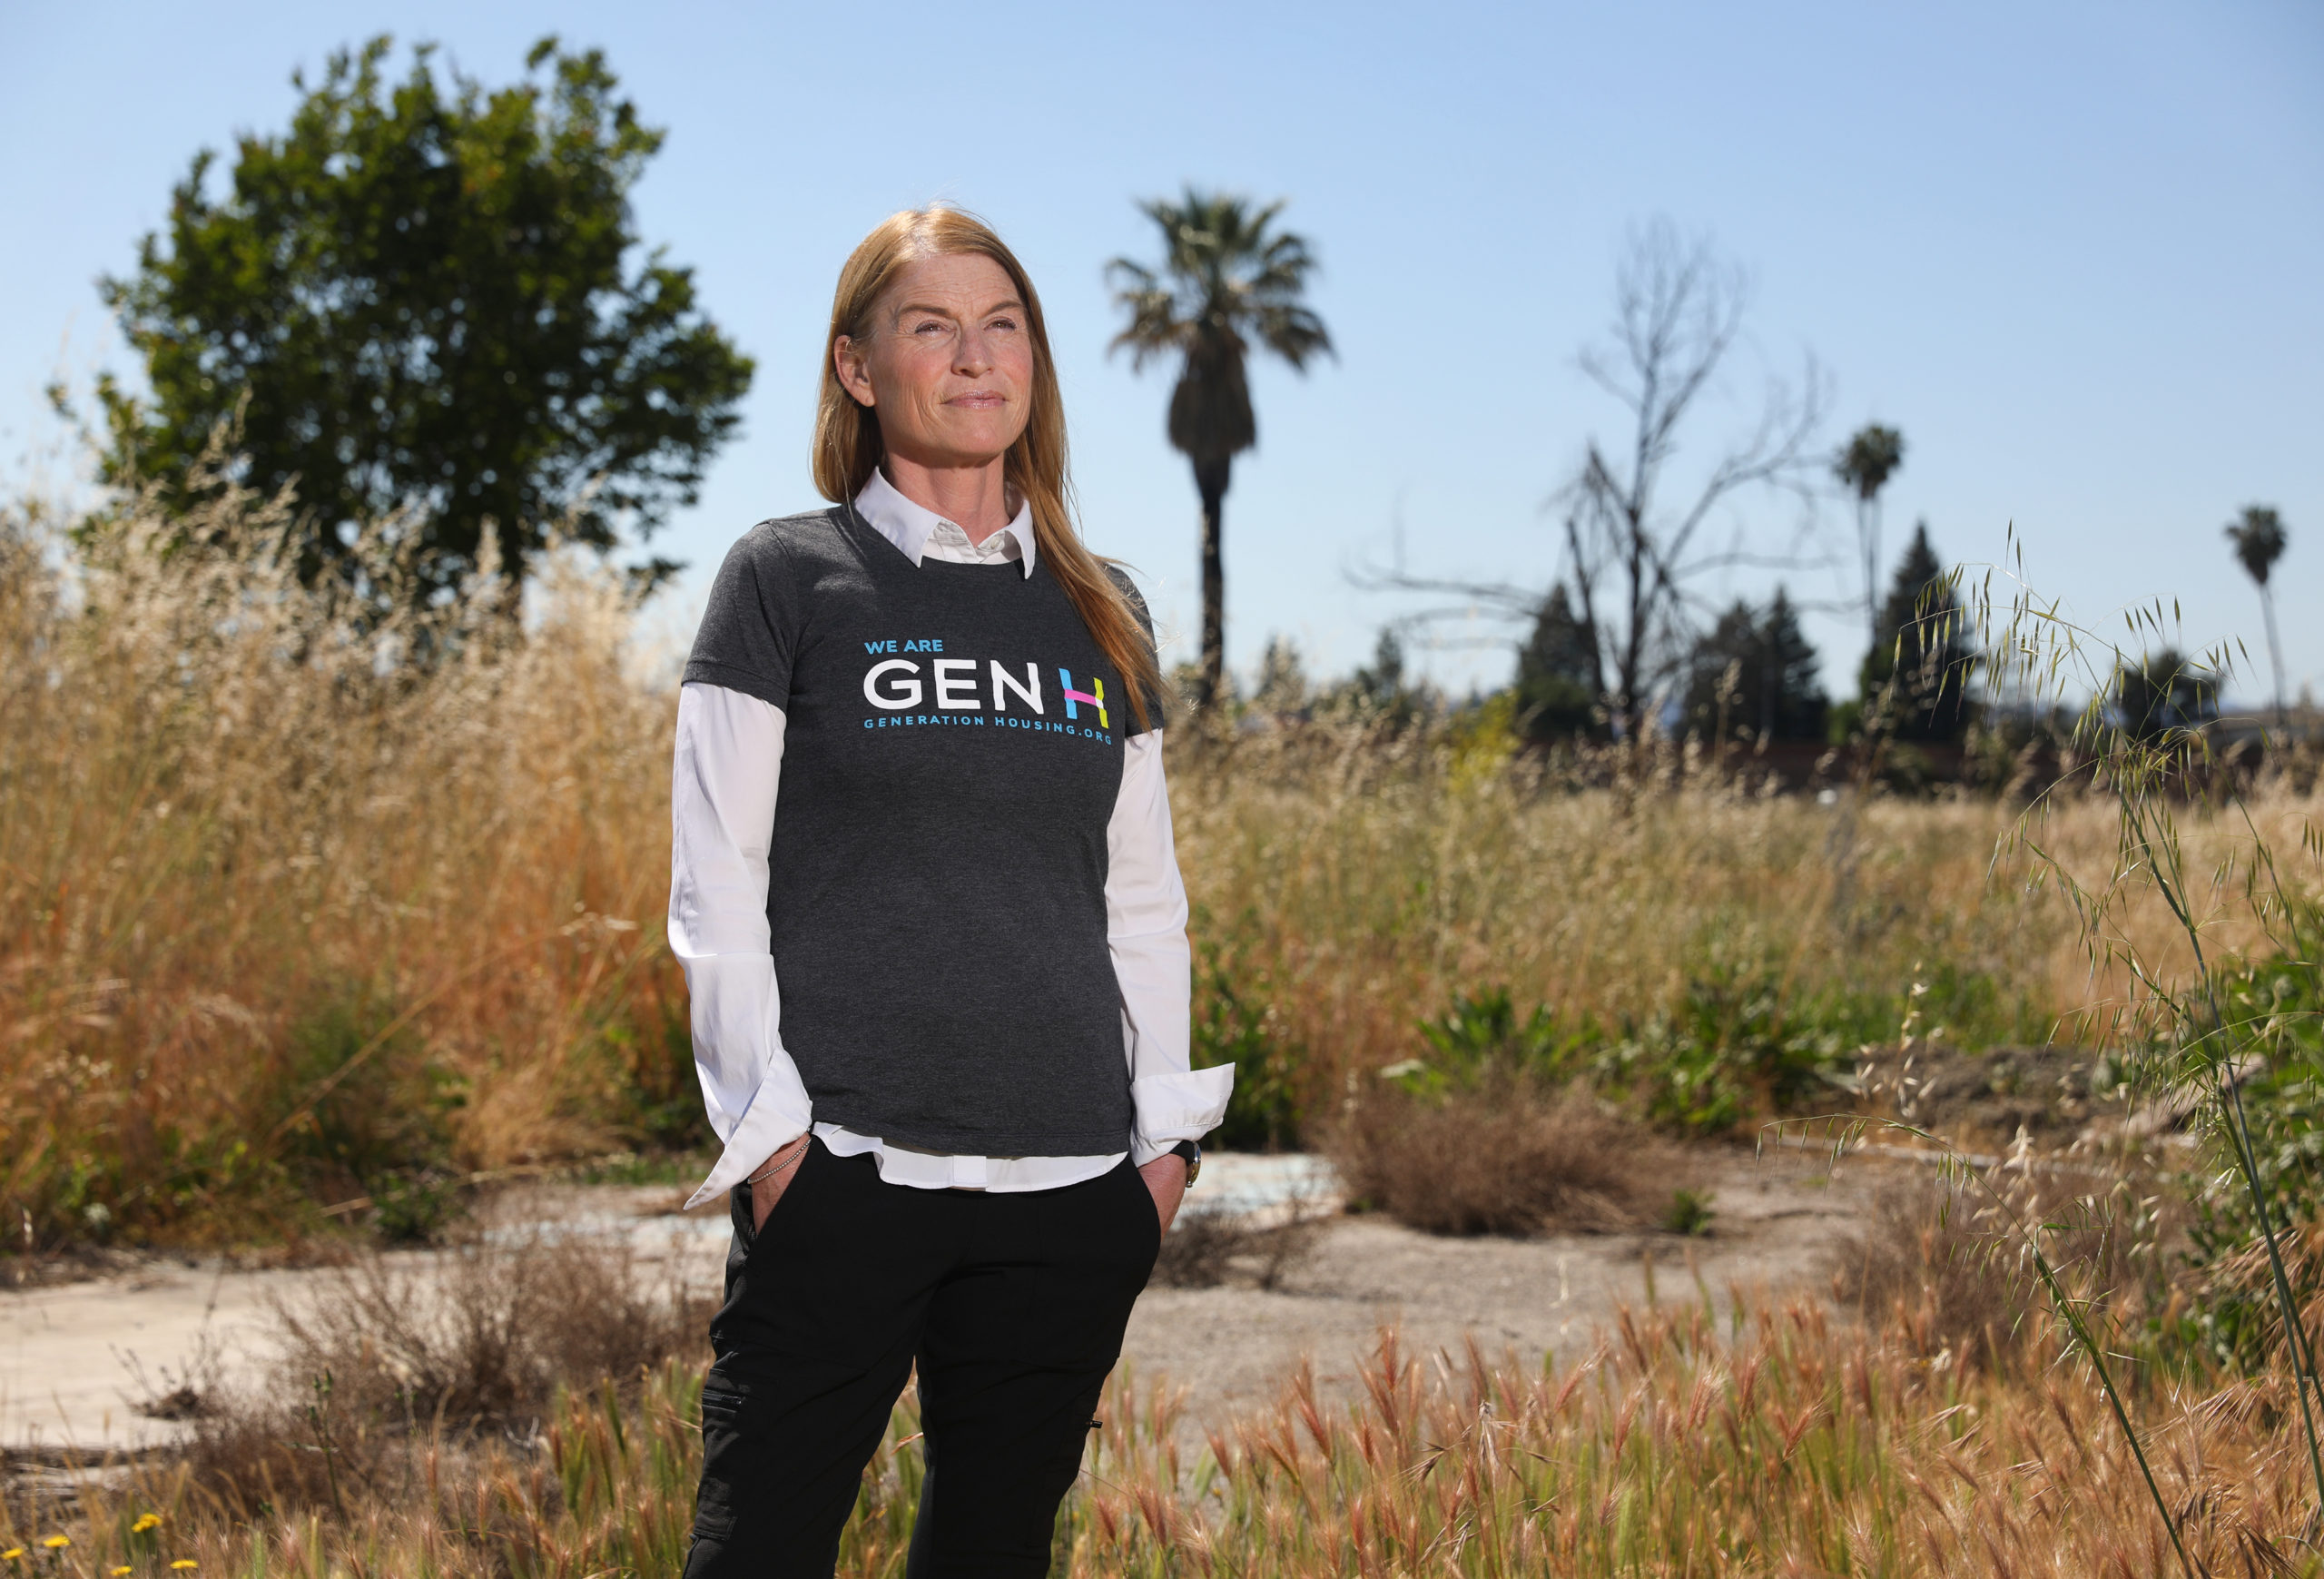 Jen Klose, executive director of Generation Housing, stands at the site of the former Journey's End mobile home park, which will be developed into affordable housing. (Christopher Chung/ The Press Democrat)